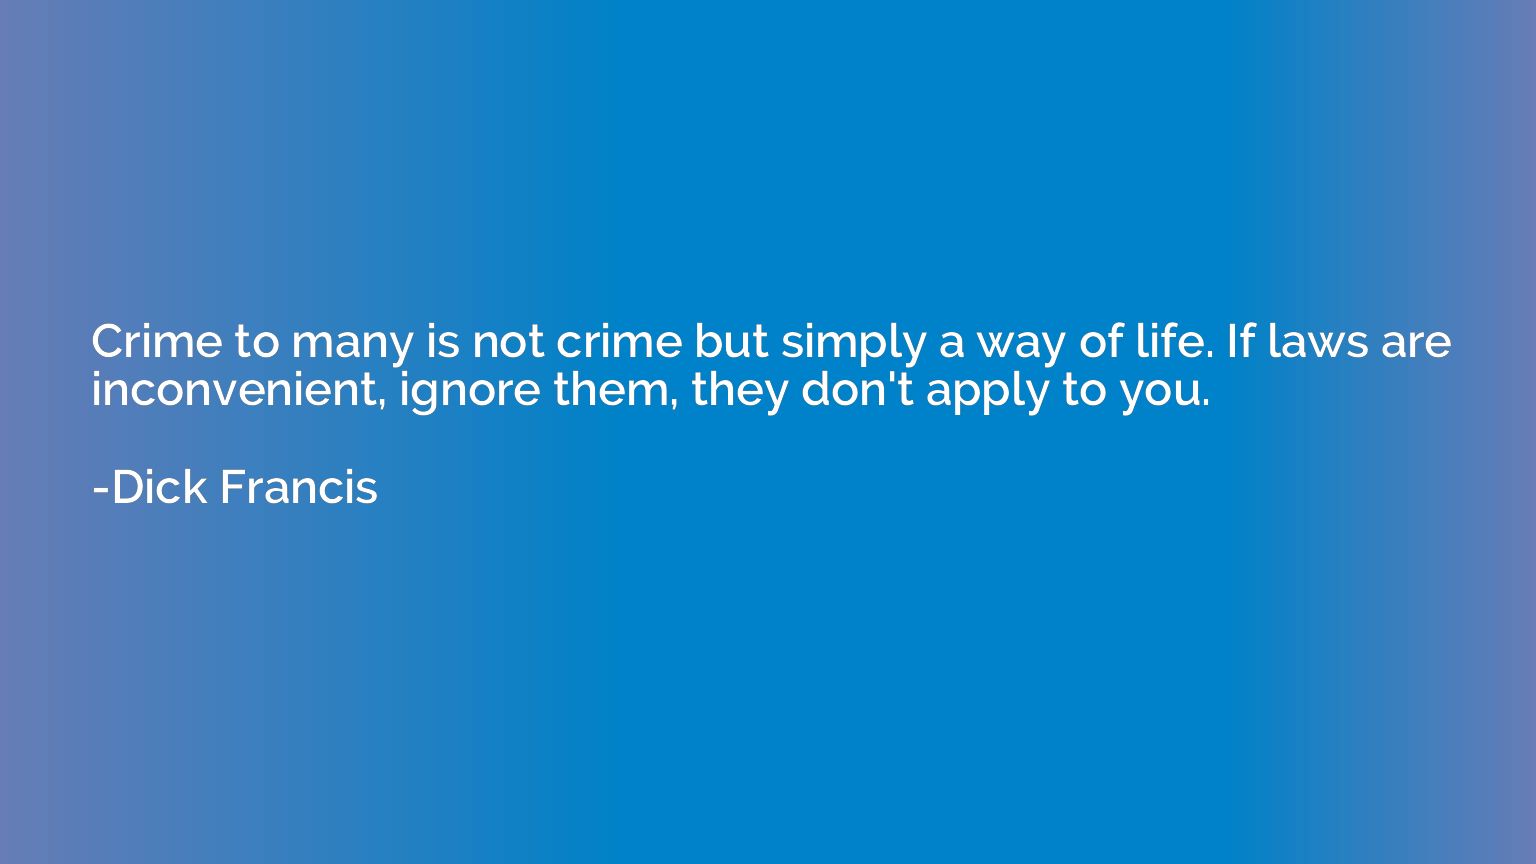 Crime to many is not crime but simply a way of life. If laws